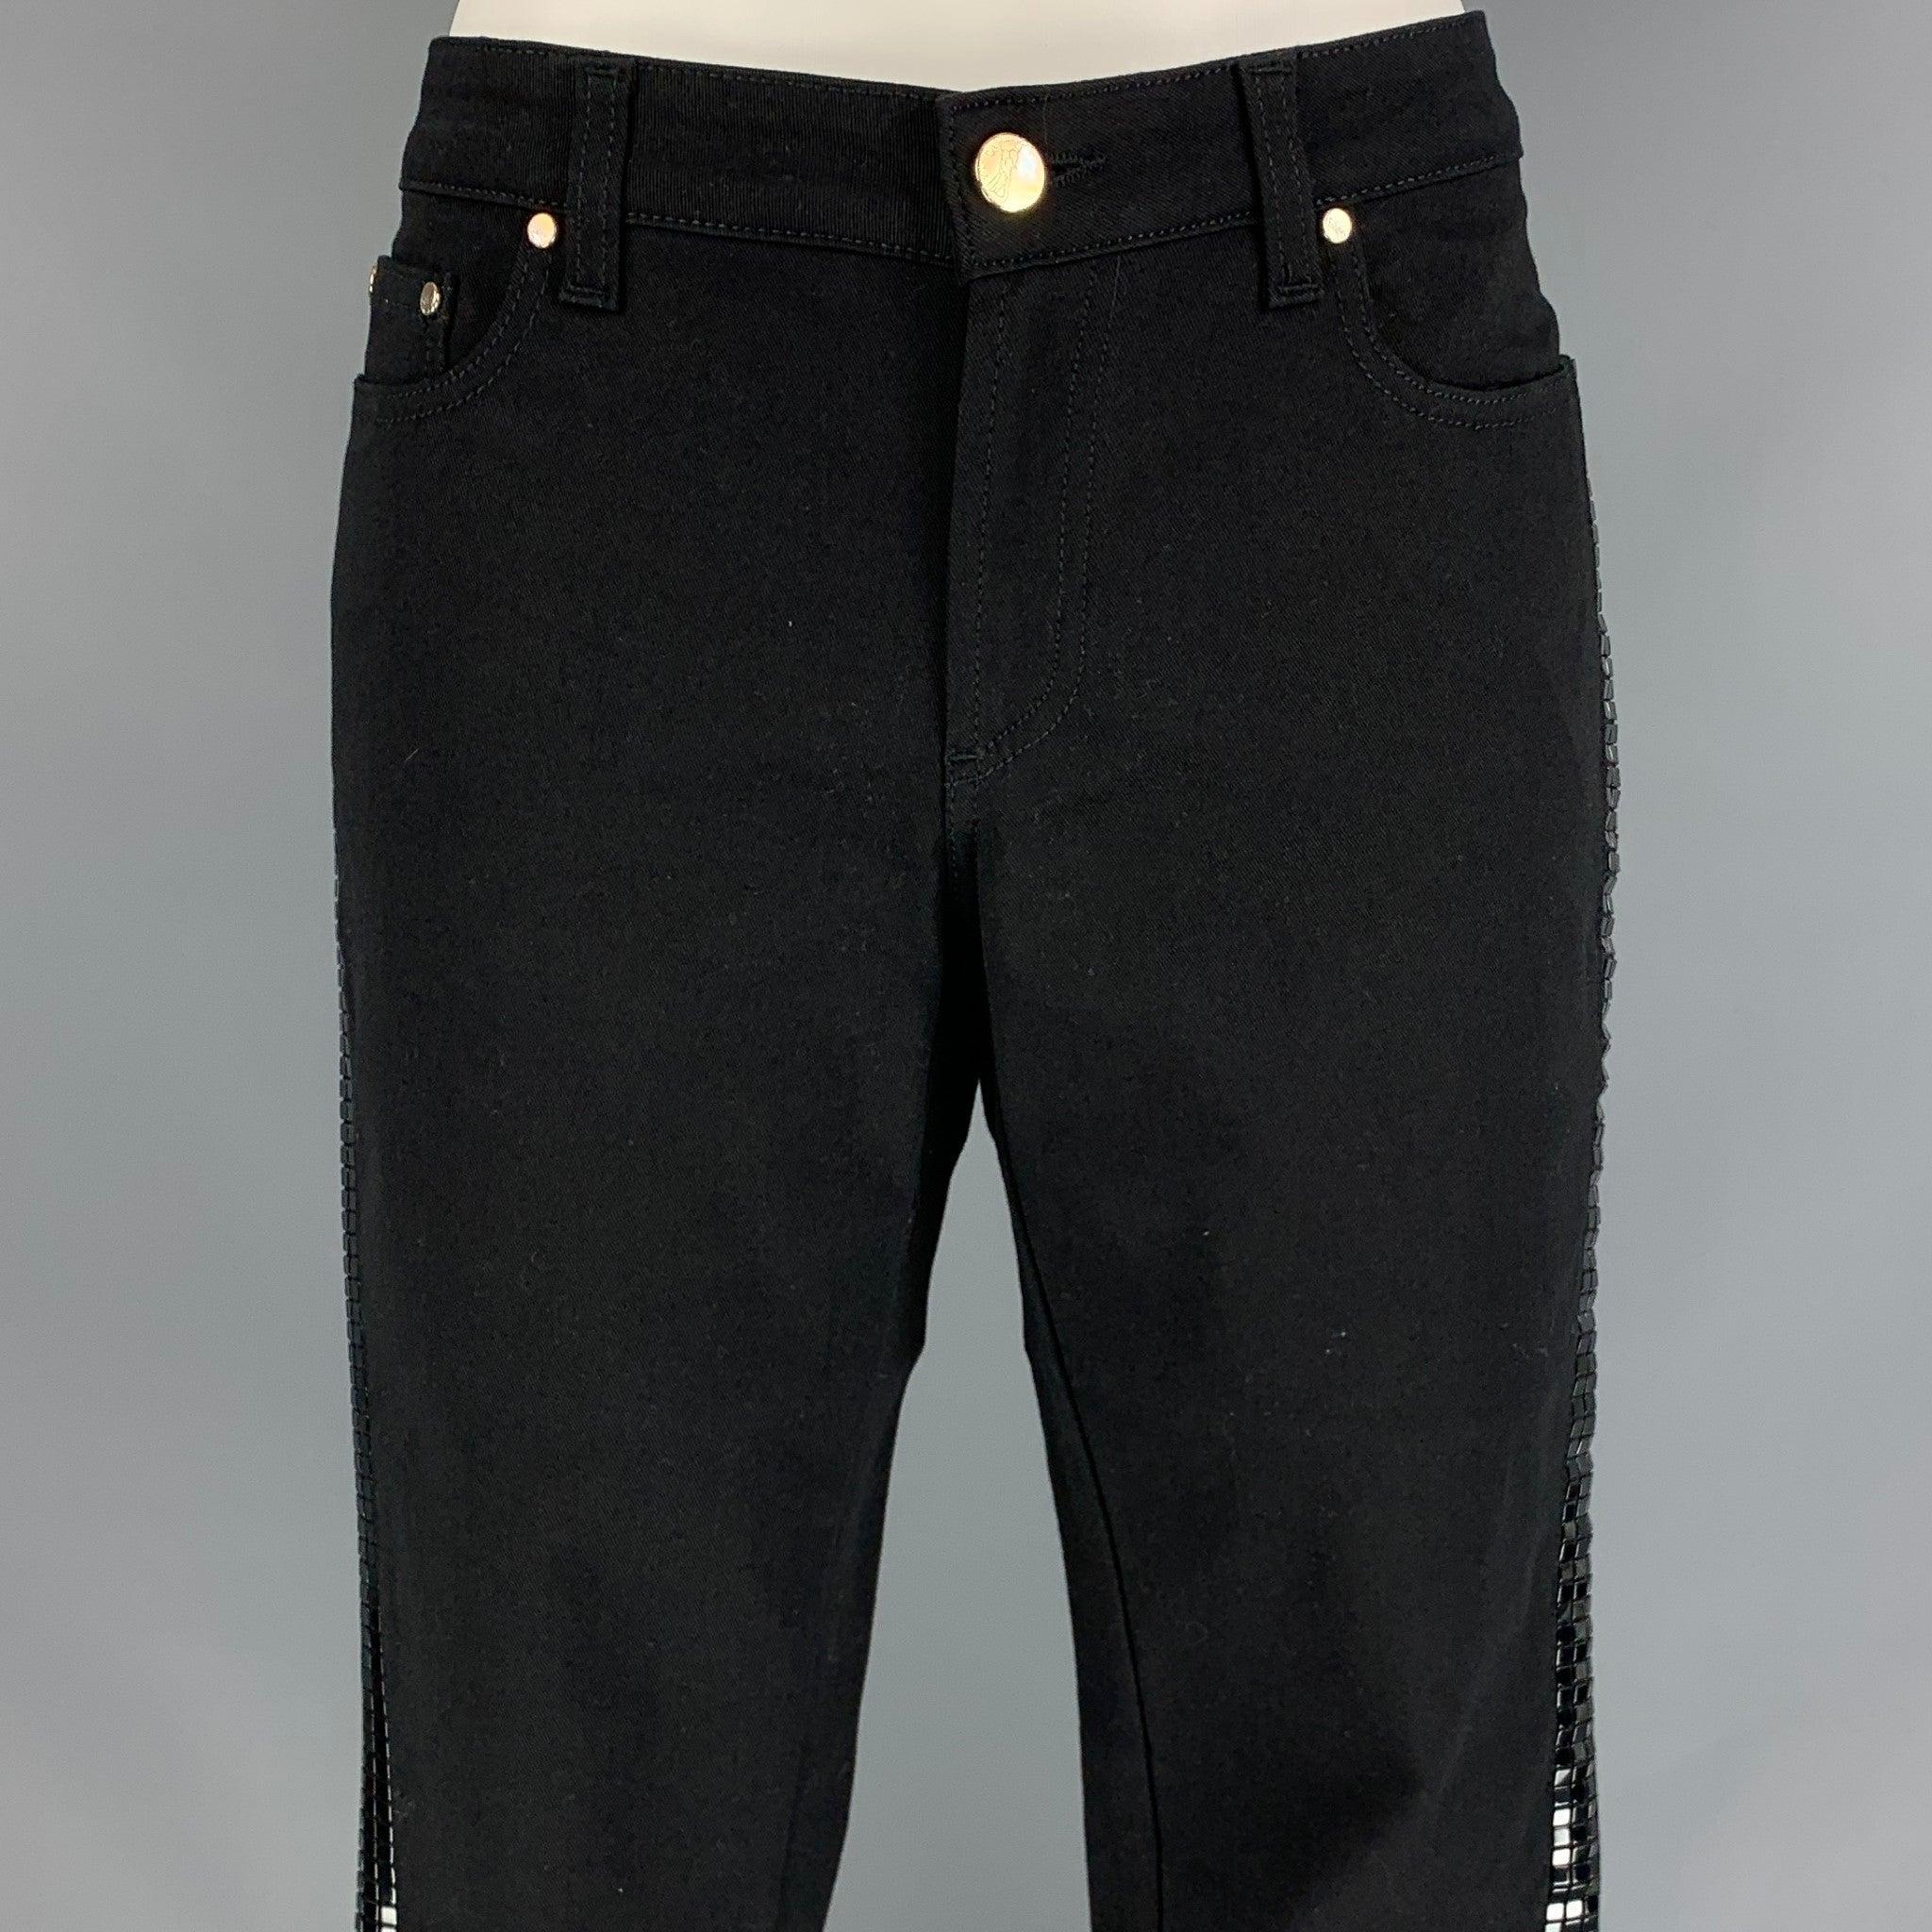 VERSACE COLLECTION casual pants comes in a black cotton blend featuring a skinny fit, side studded design, silver tone hardware, and a zip fly closure. Made in Romania.
New With Tags.
 

Marked:   24  

Measurements: 
  Waist: 26 inches  Rise: 7.5